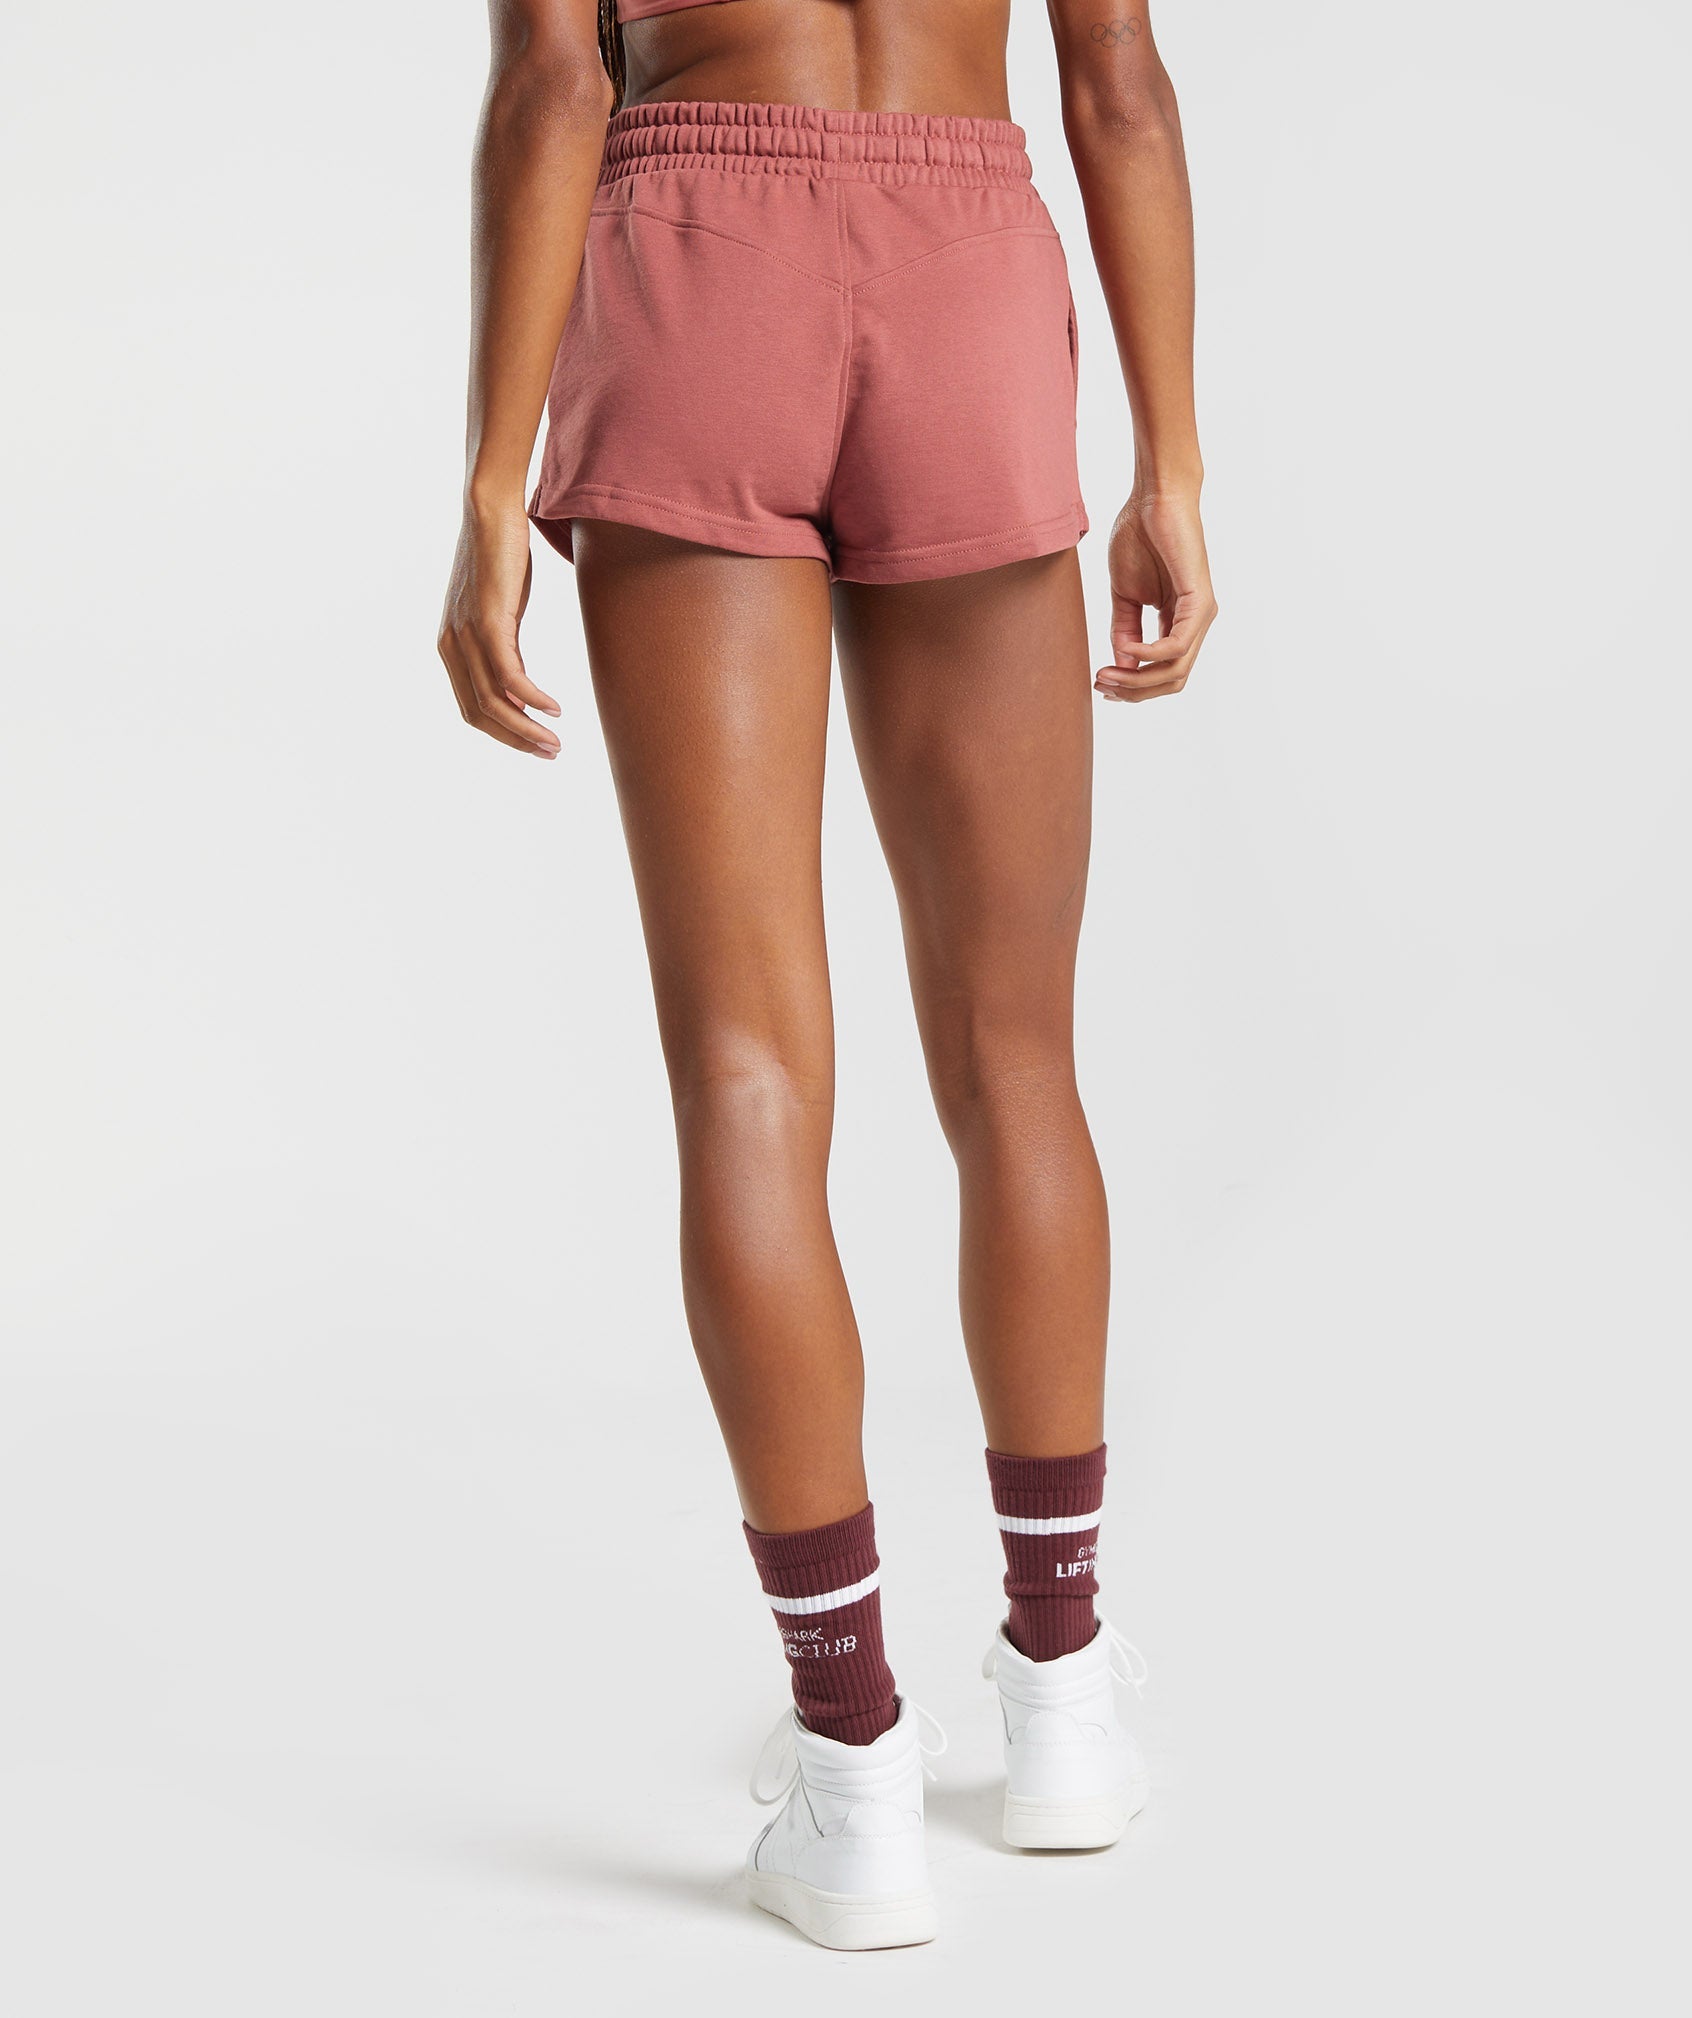 Social Club Shorts in Rose Brown - view 2